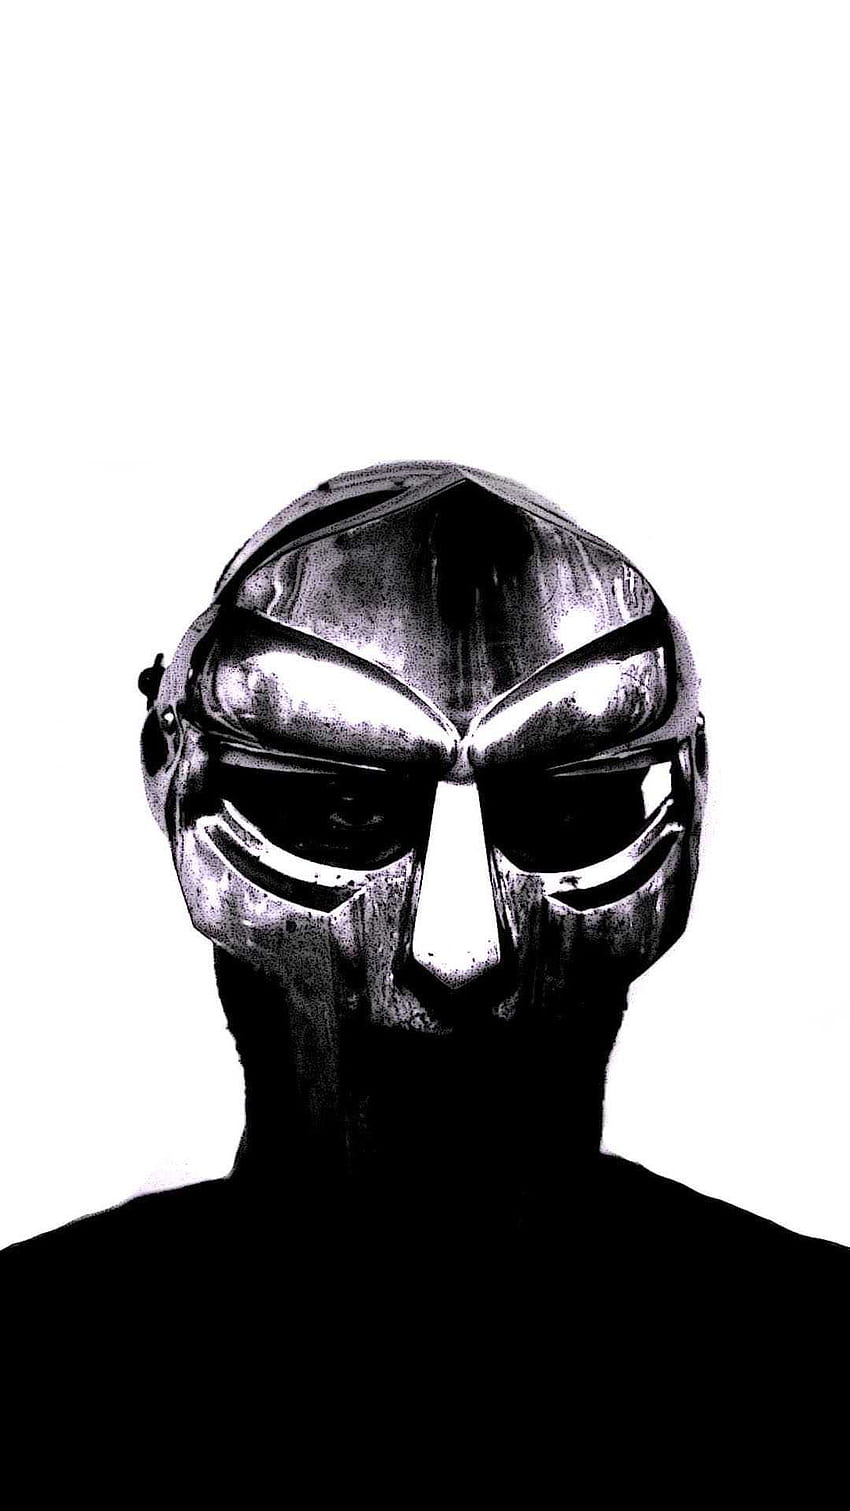 QIANC Mf Doom Poster Madvillainy Posters Poster Decorative Painting Canvas  Wall Art Living Room Posters zhruf Bedroom Painting 16x24inch40x60cm   Amazonca Home